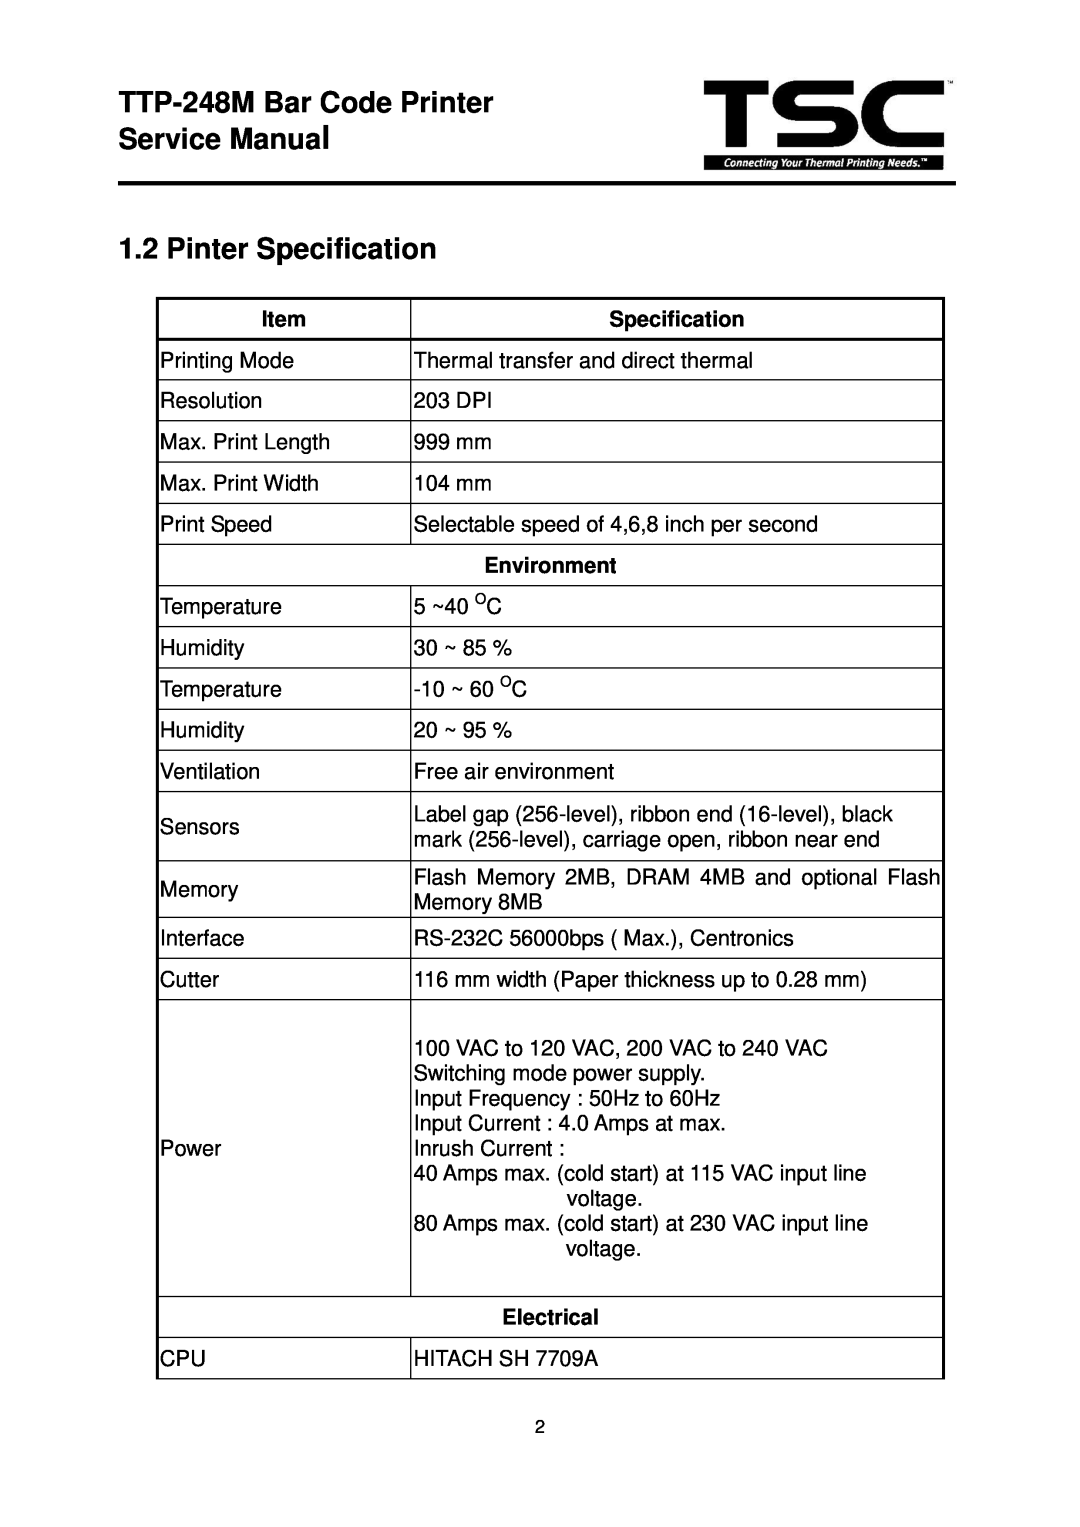 The Speaker Company TTP 248M TTP-248M Bar Code Printer Service Manual 1.2 Pinter Specification, Environment, Electrical 